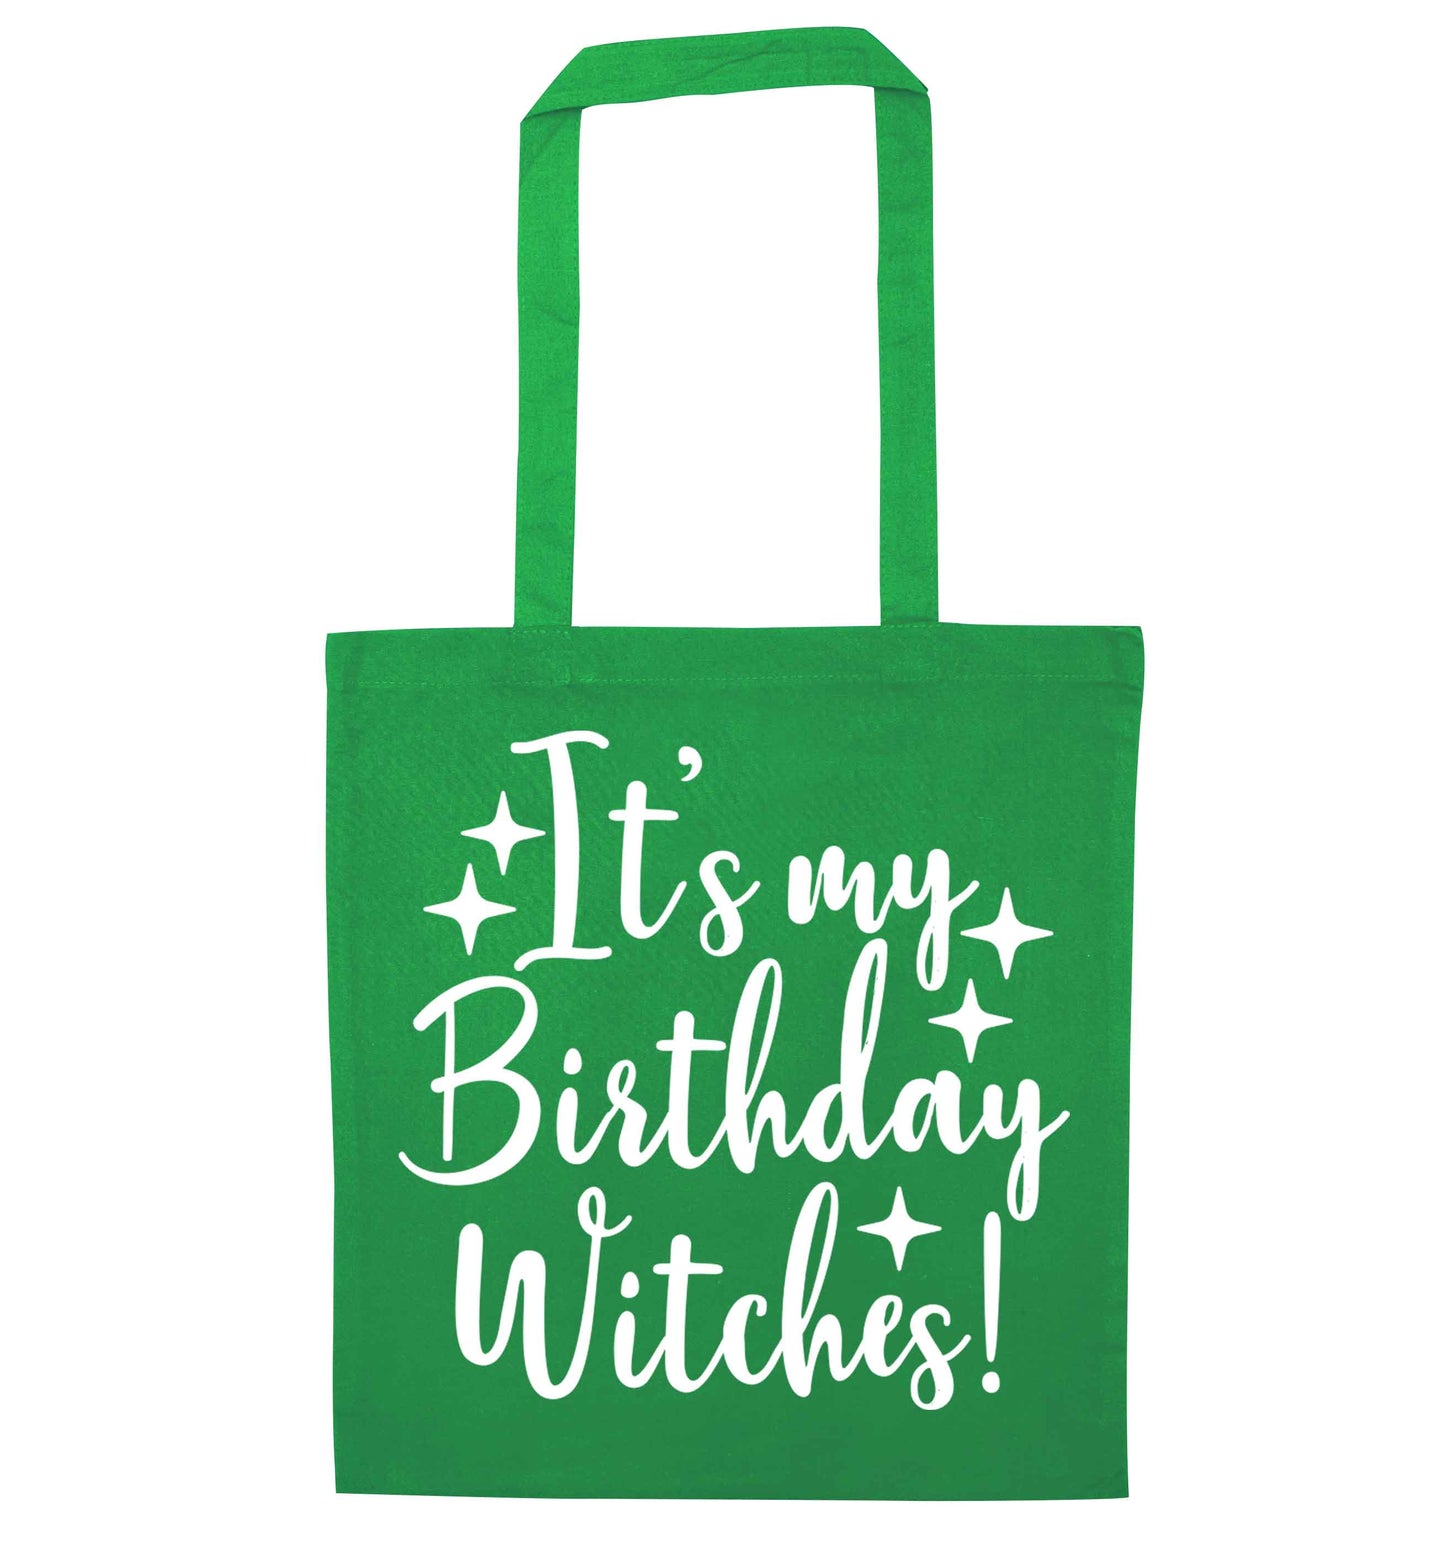 It's my birthday witches!green tote bag